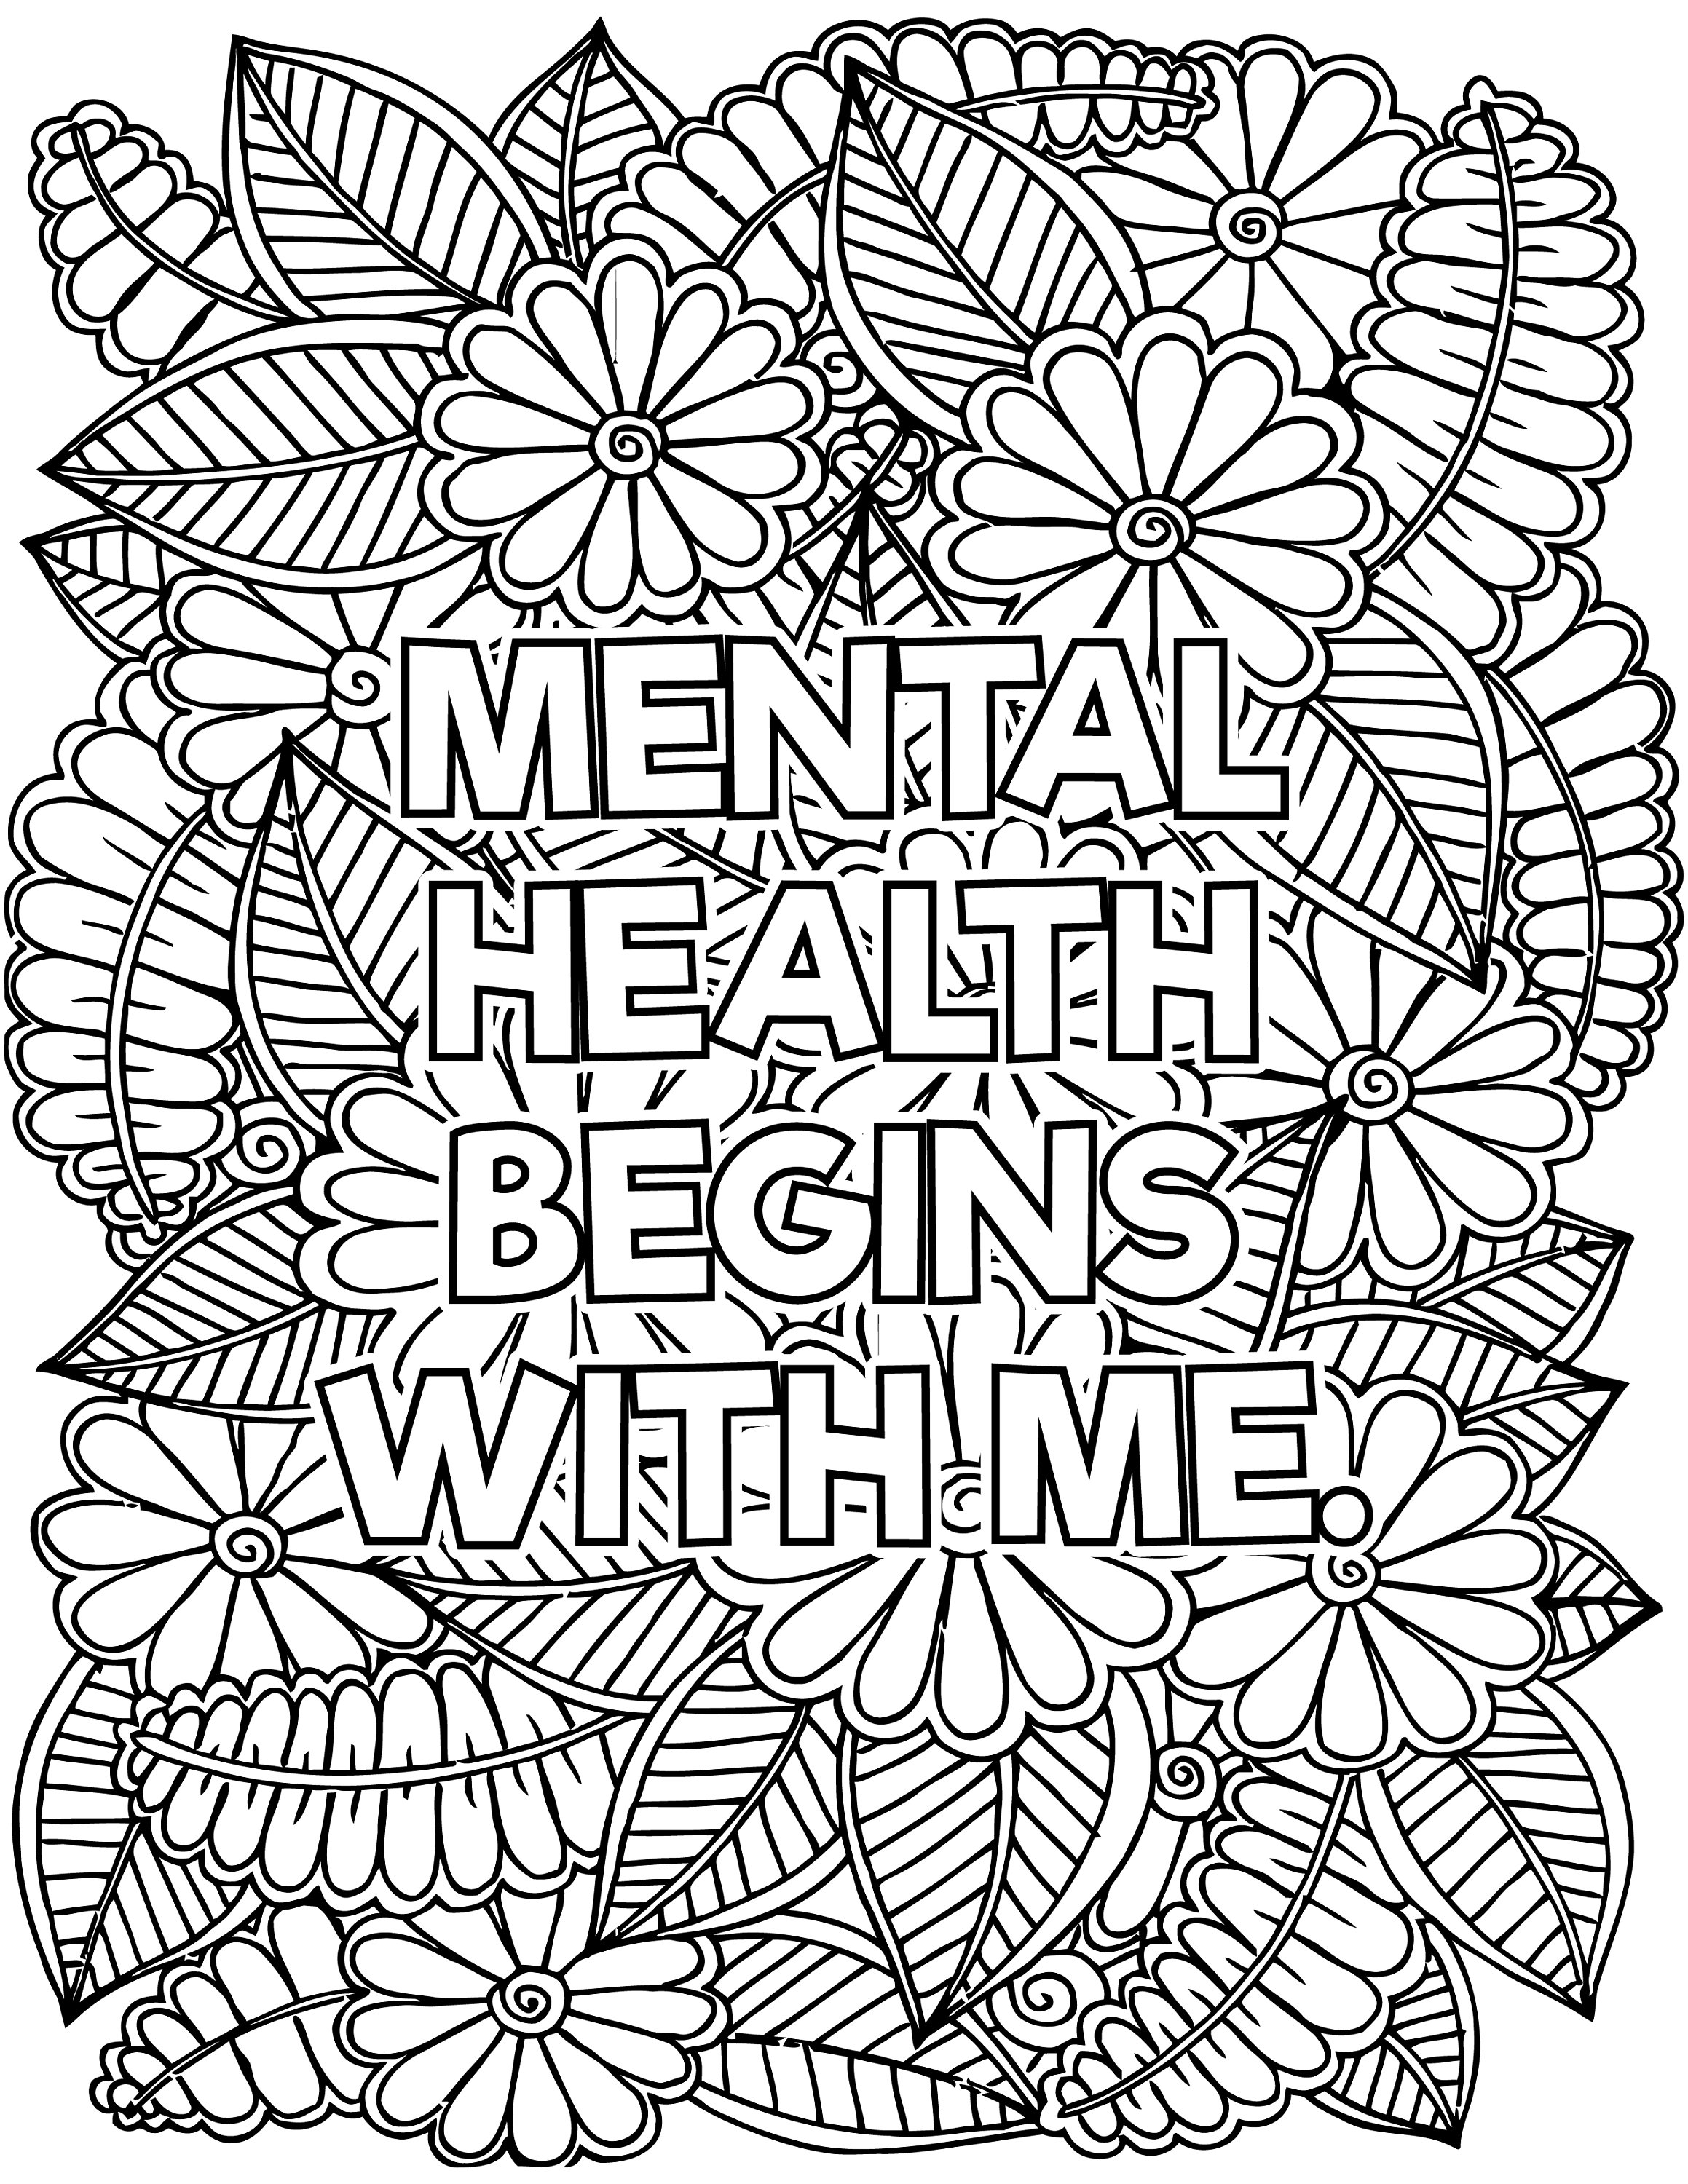 10-mental-health-affirmations-coloring-book-pages-etsy